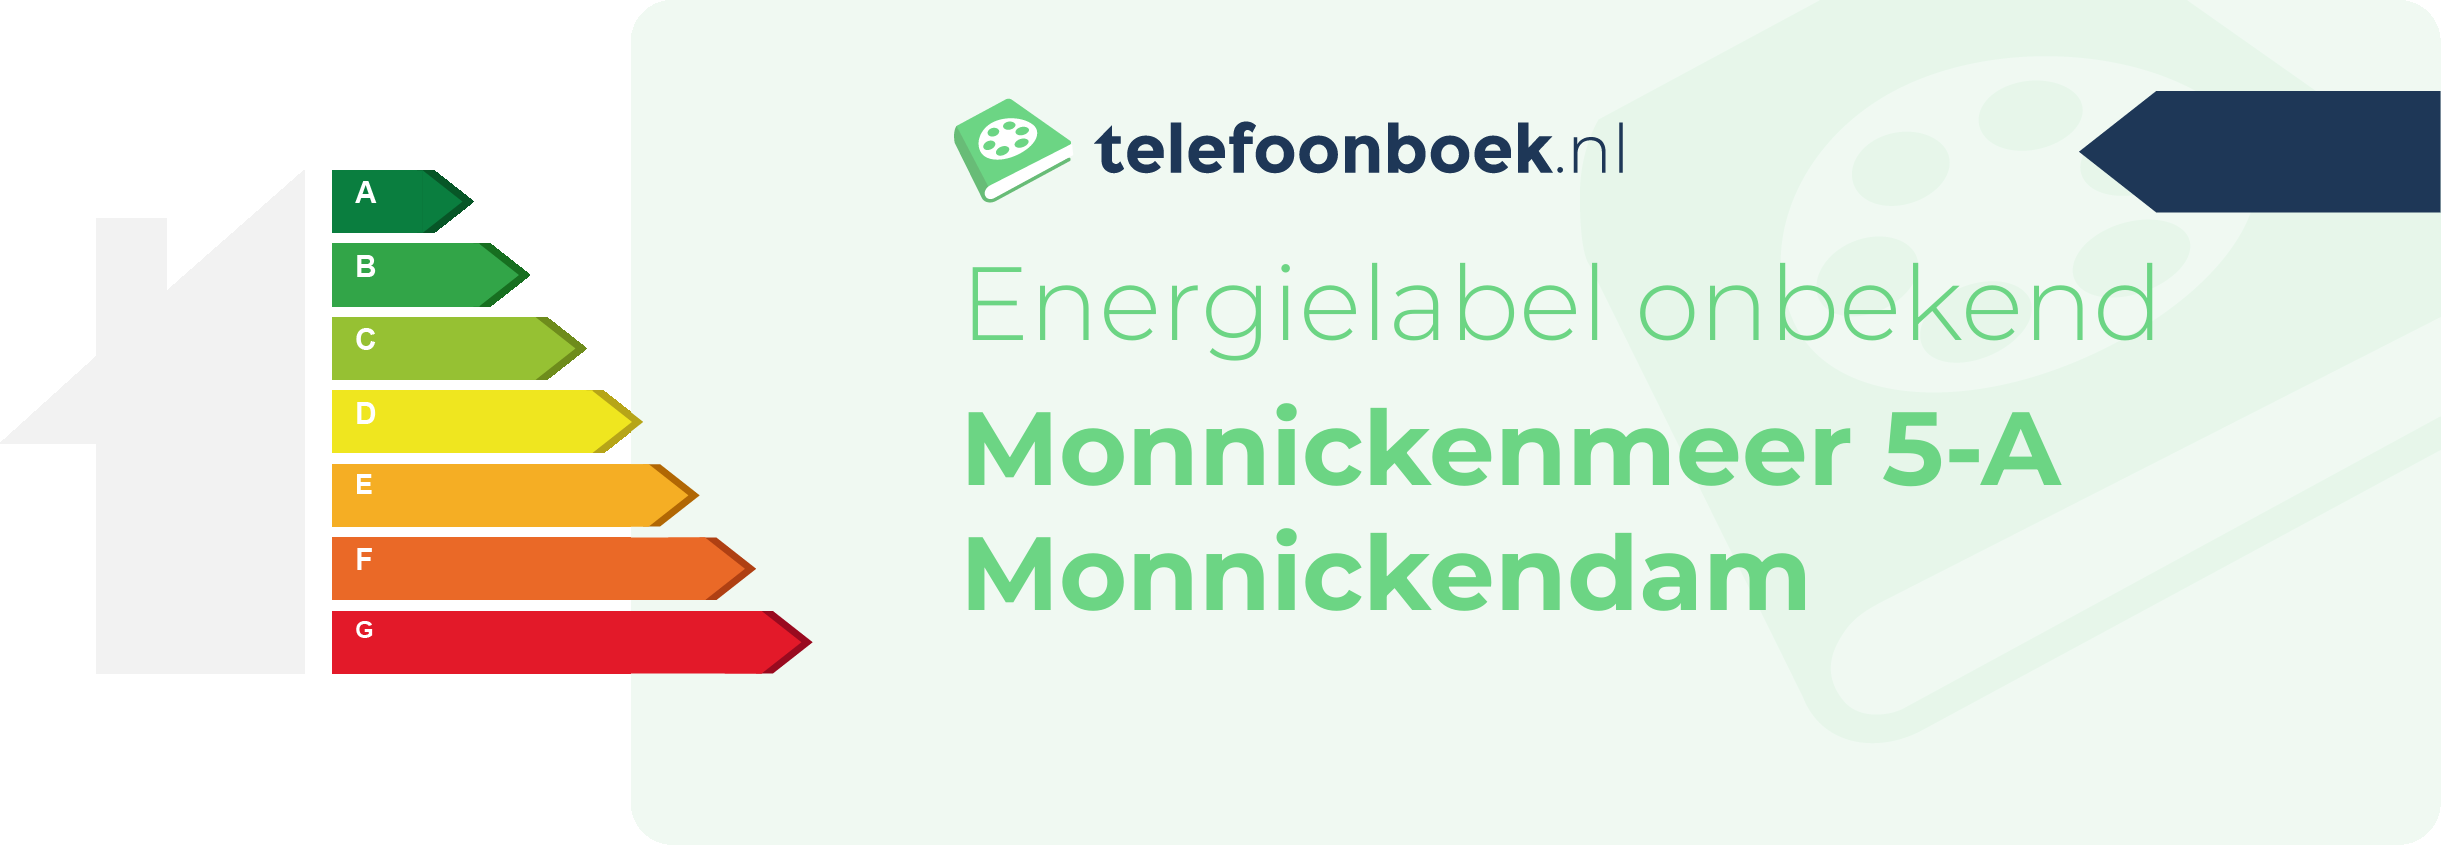 Energielabel Monnickenmeer 5-A Monnickendam